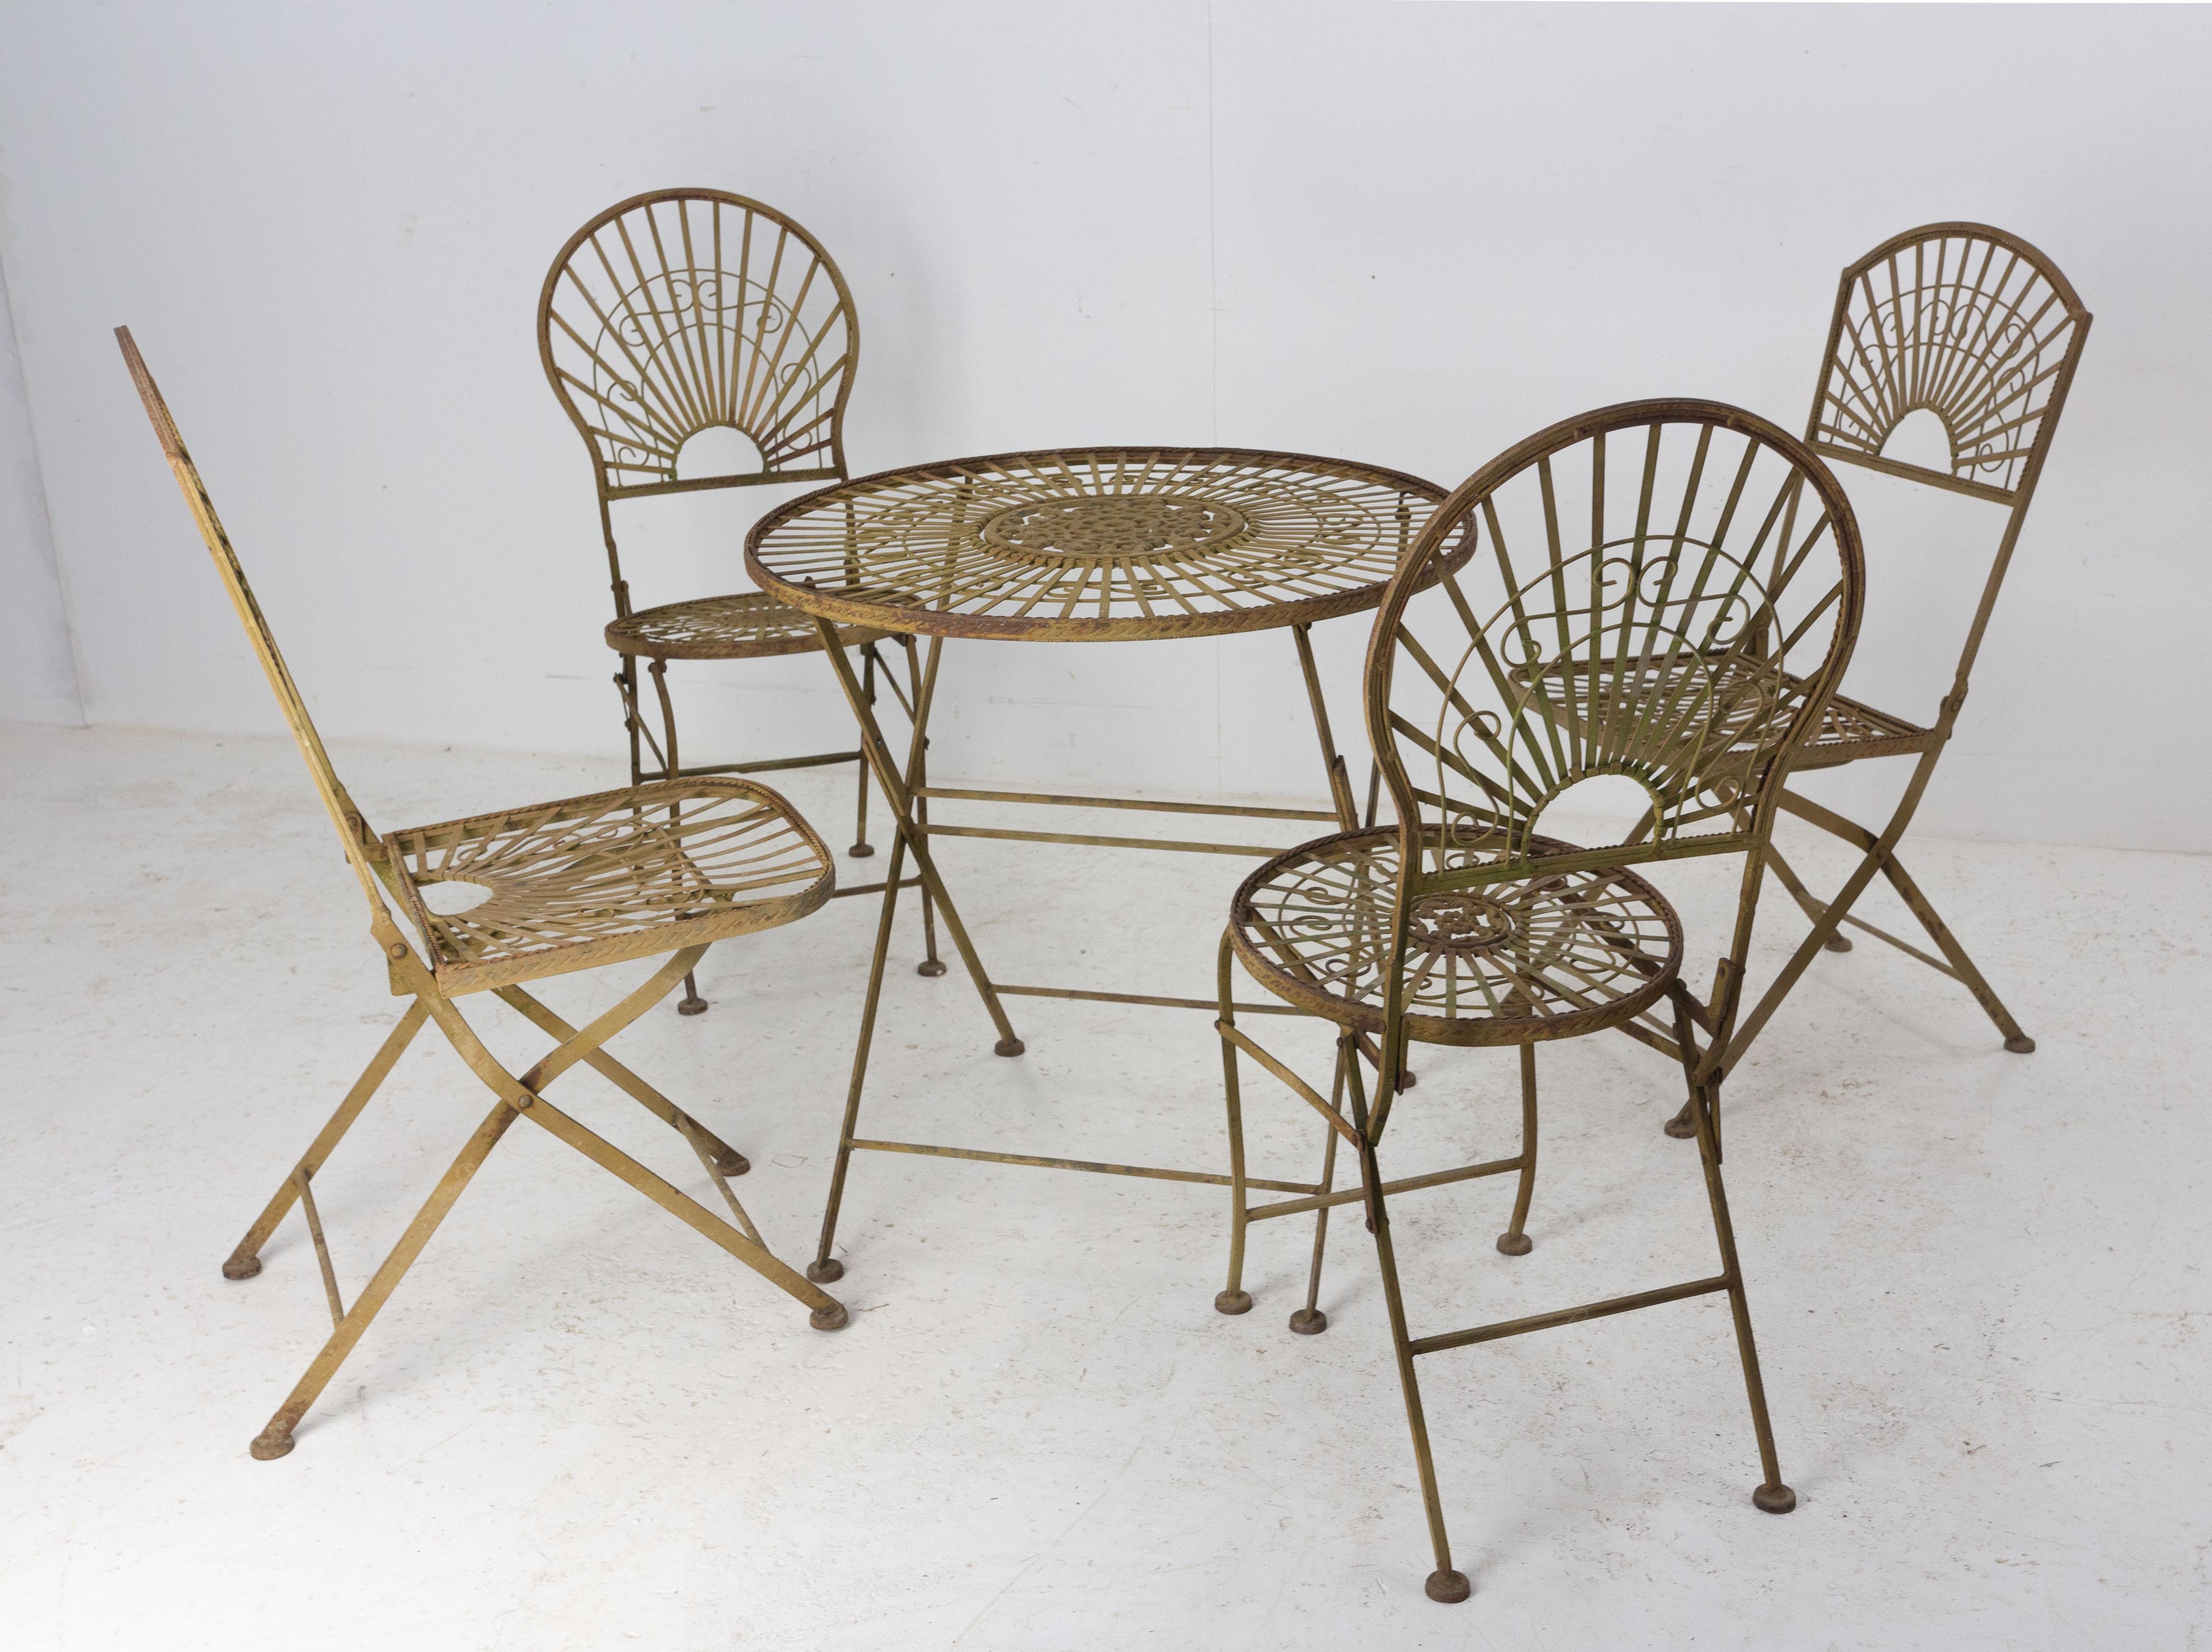 French folding iron chairs and table, with two different shapes of matching chairs.
Good condition with authenticate patina.
Each piece is fold-able.
Dimension: 
Rounded back chairs: D 19.68 in. W 15.35 in. H 35.43 in. Seat H 17.32 in. ( D 50, W